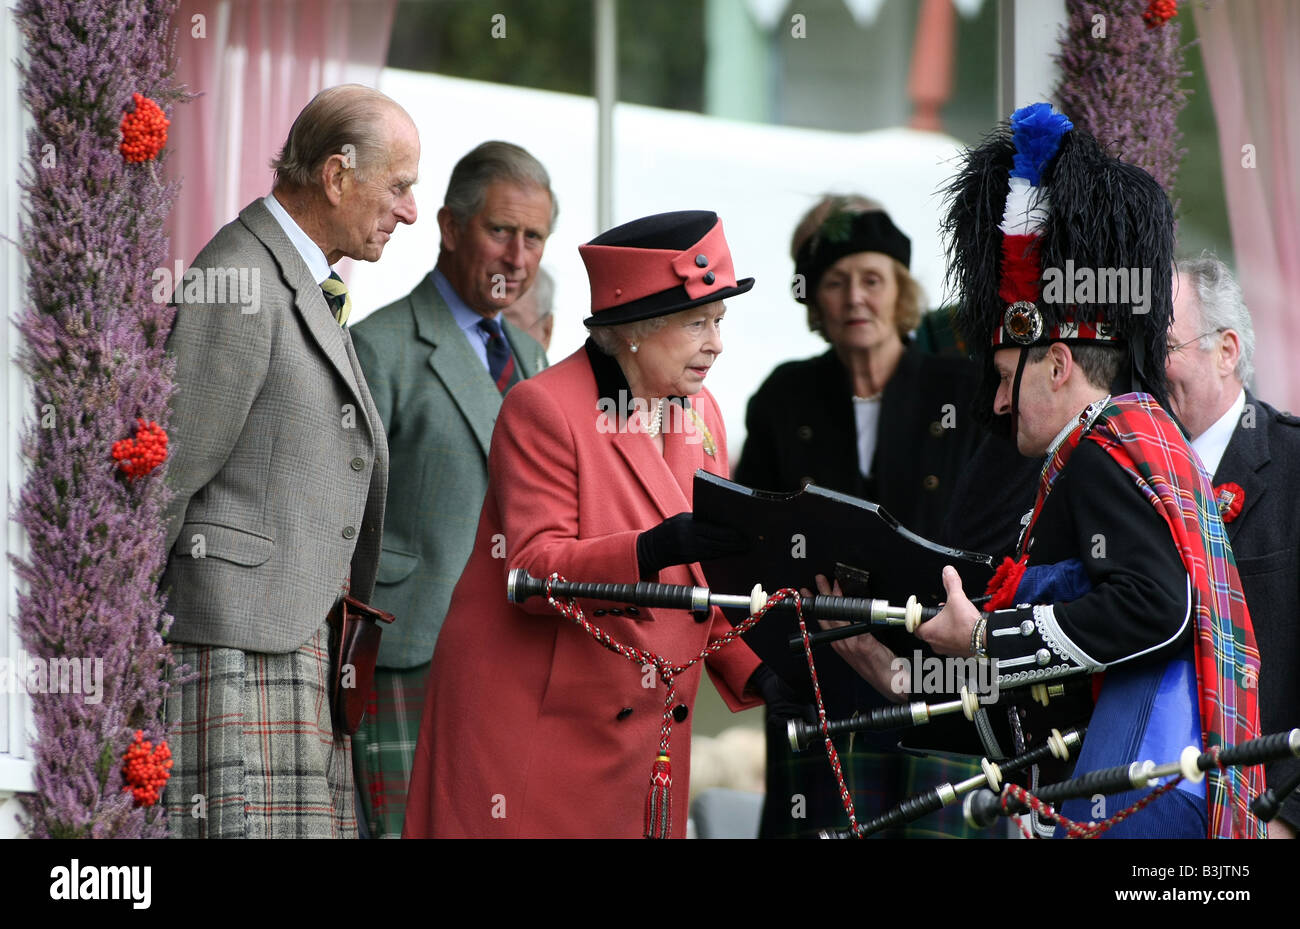 The Queen, Prince Philip and Prince Charles present the prizes at the famous Braemar Gathering in Aberdeenshire, Scotland, UK Stock Photo